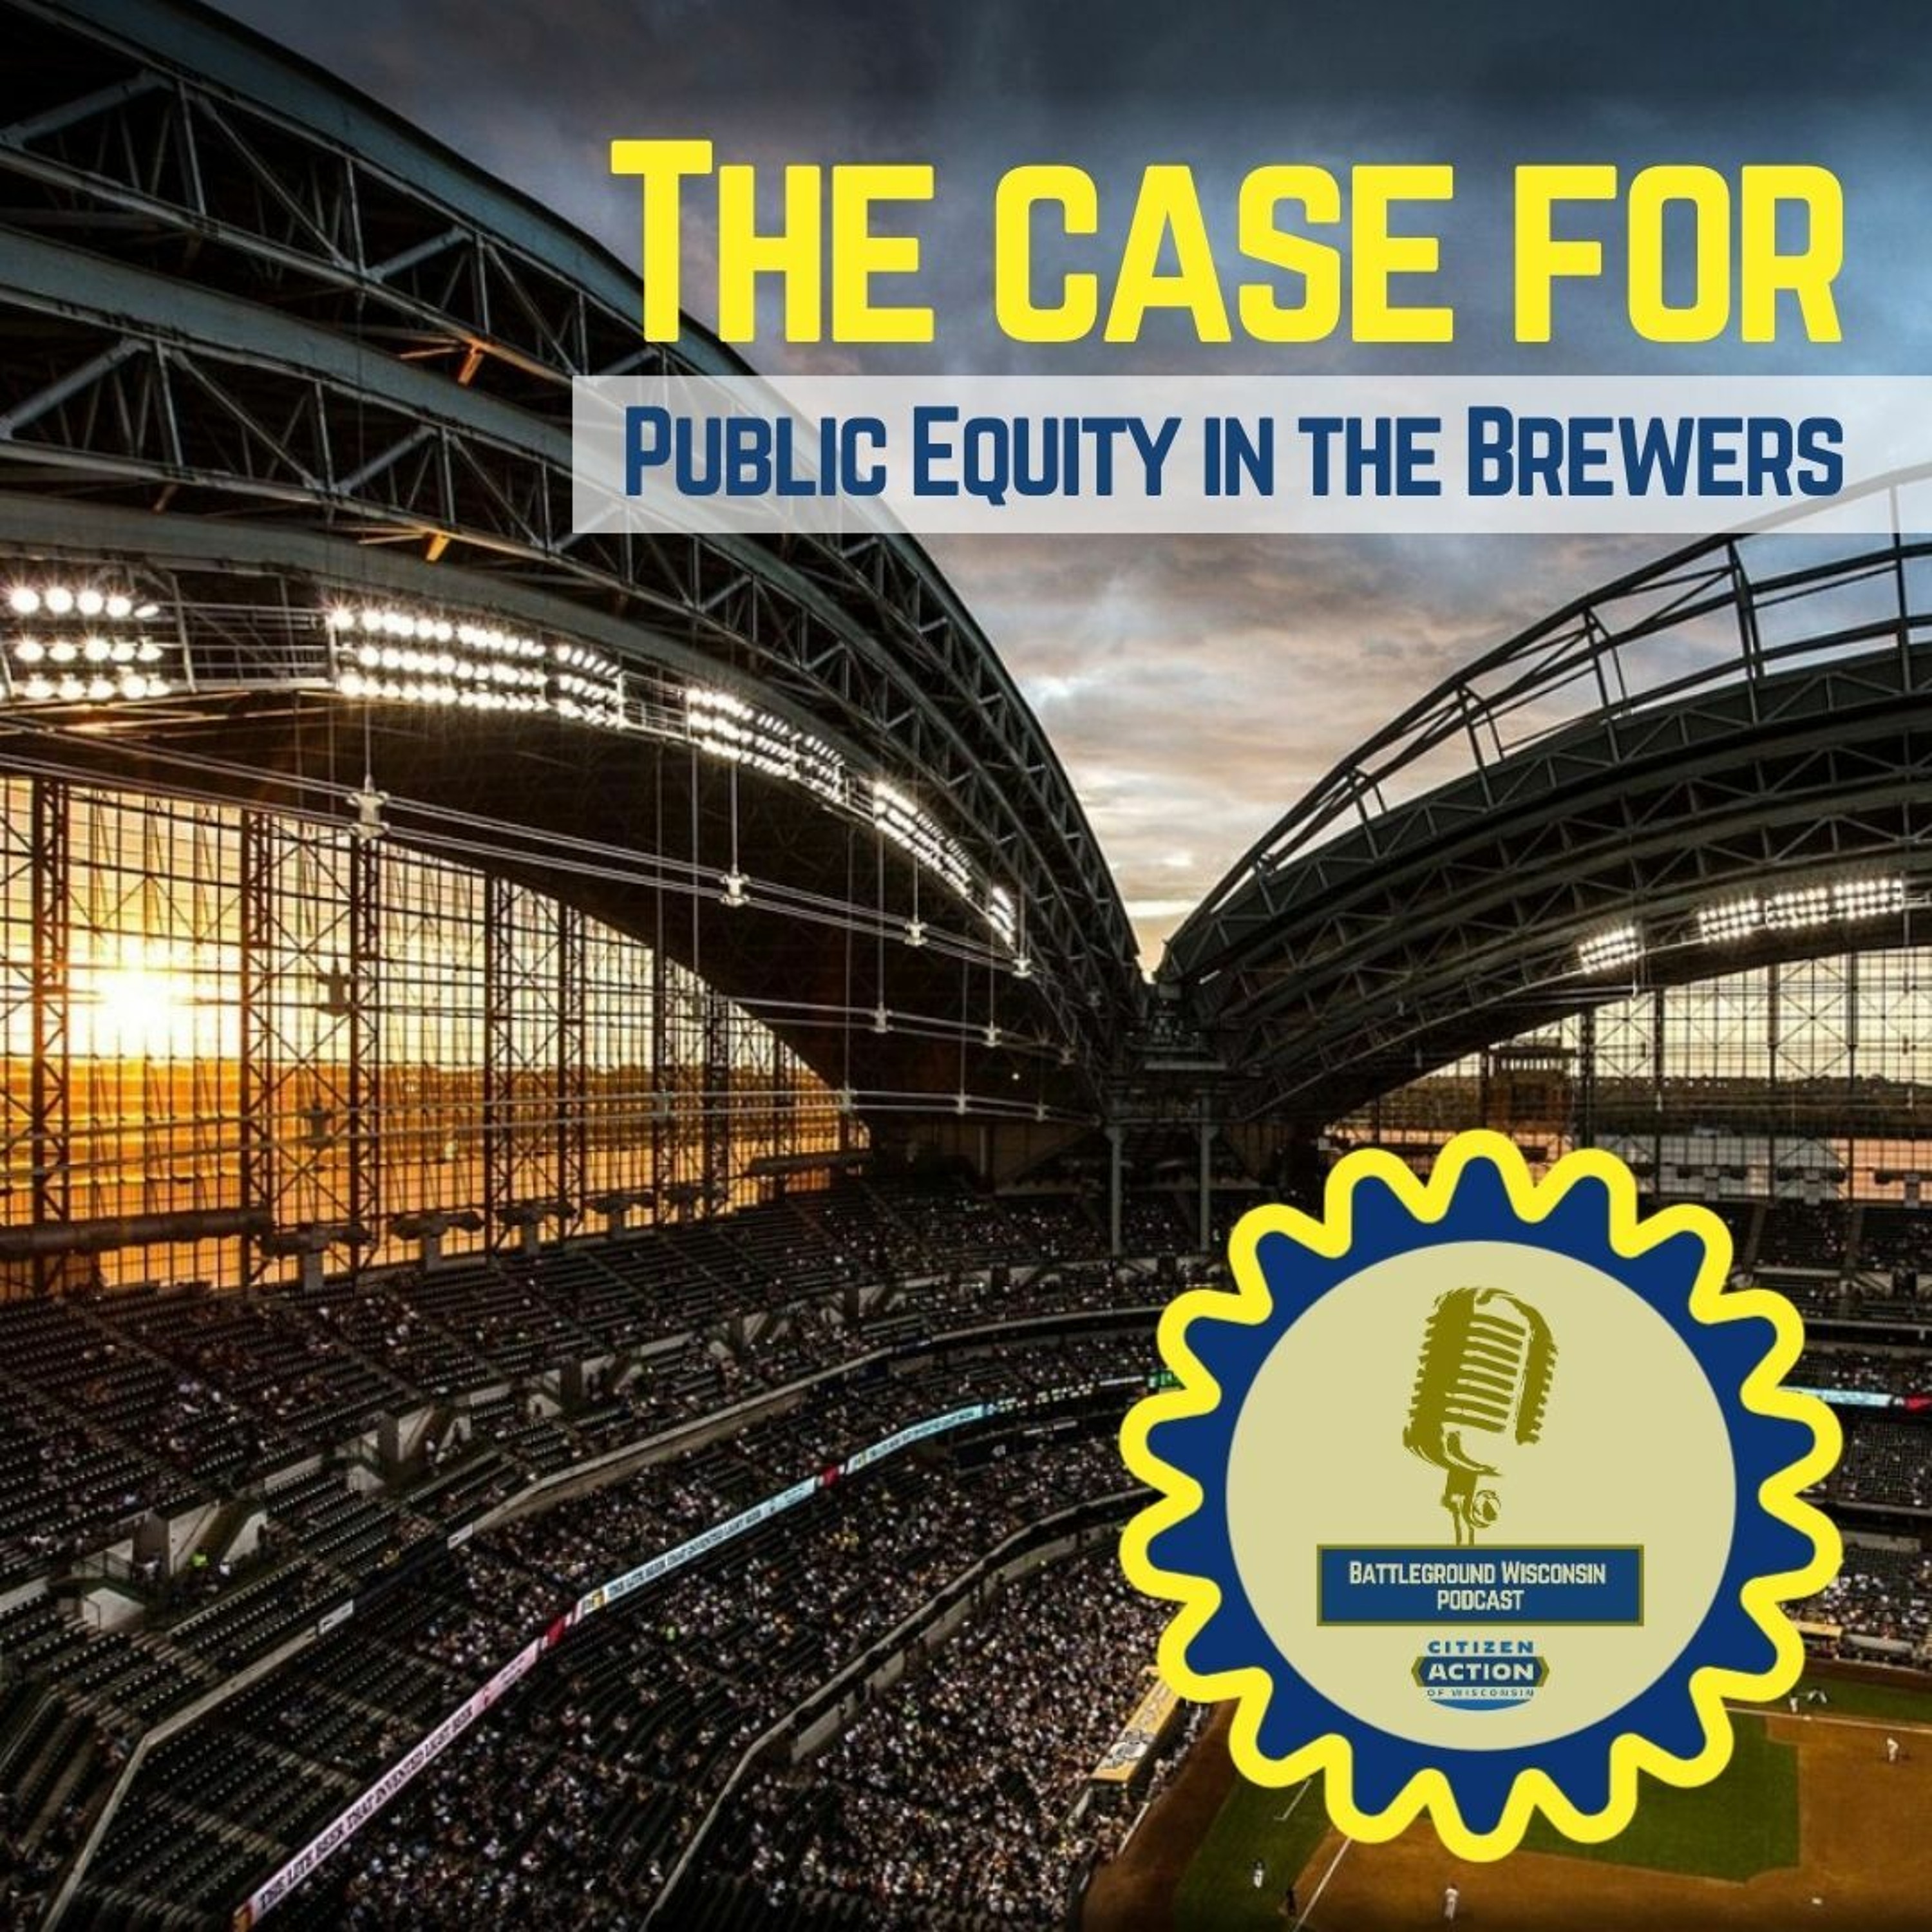 ReThink Brewers Ownership: A push for public equity